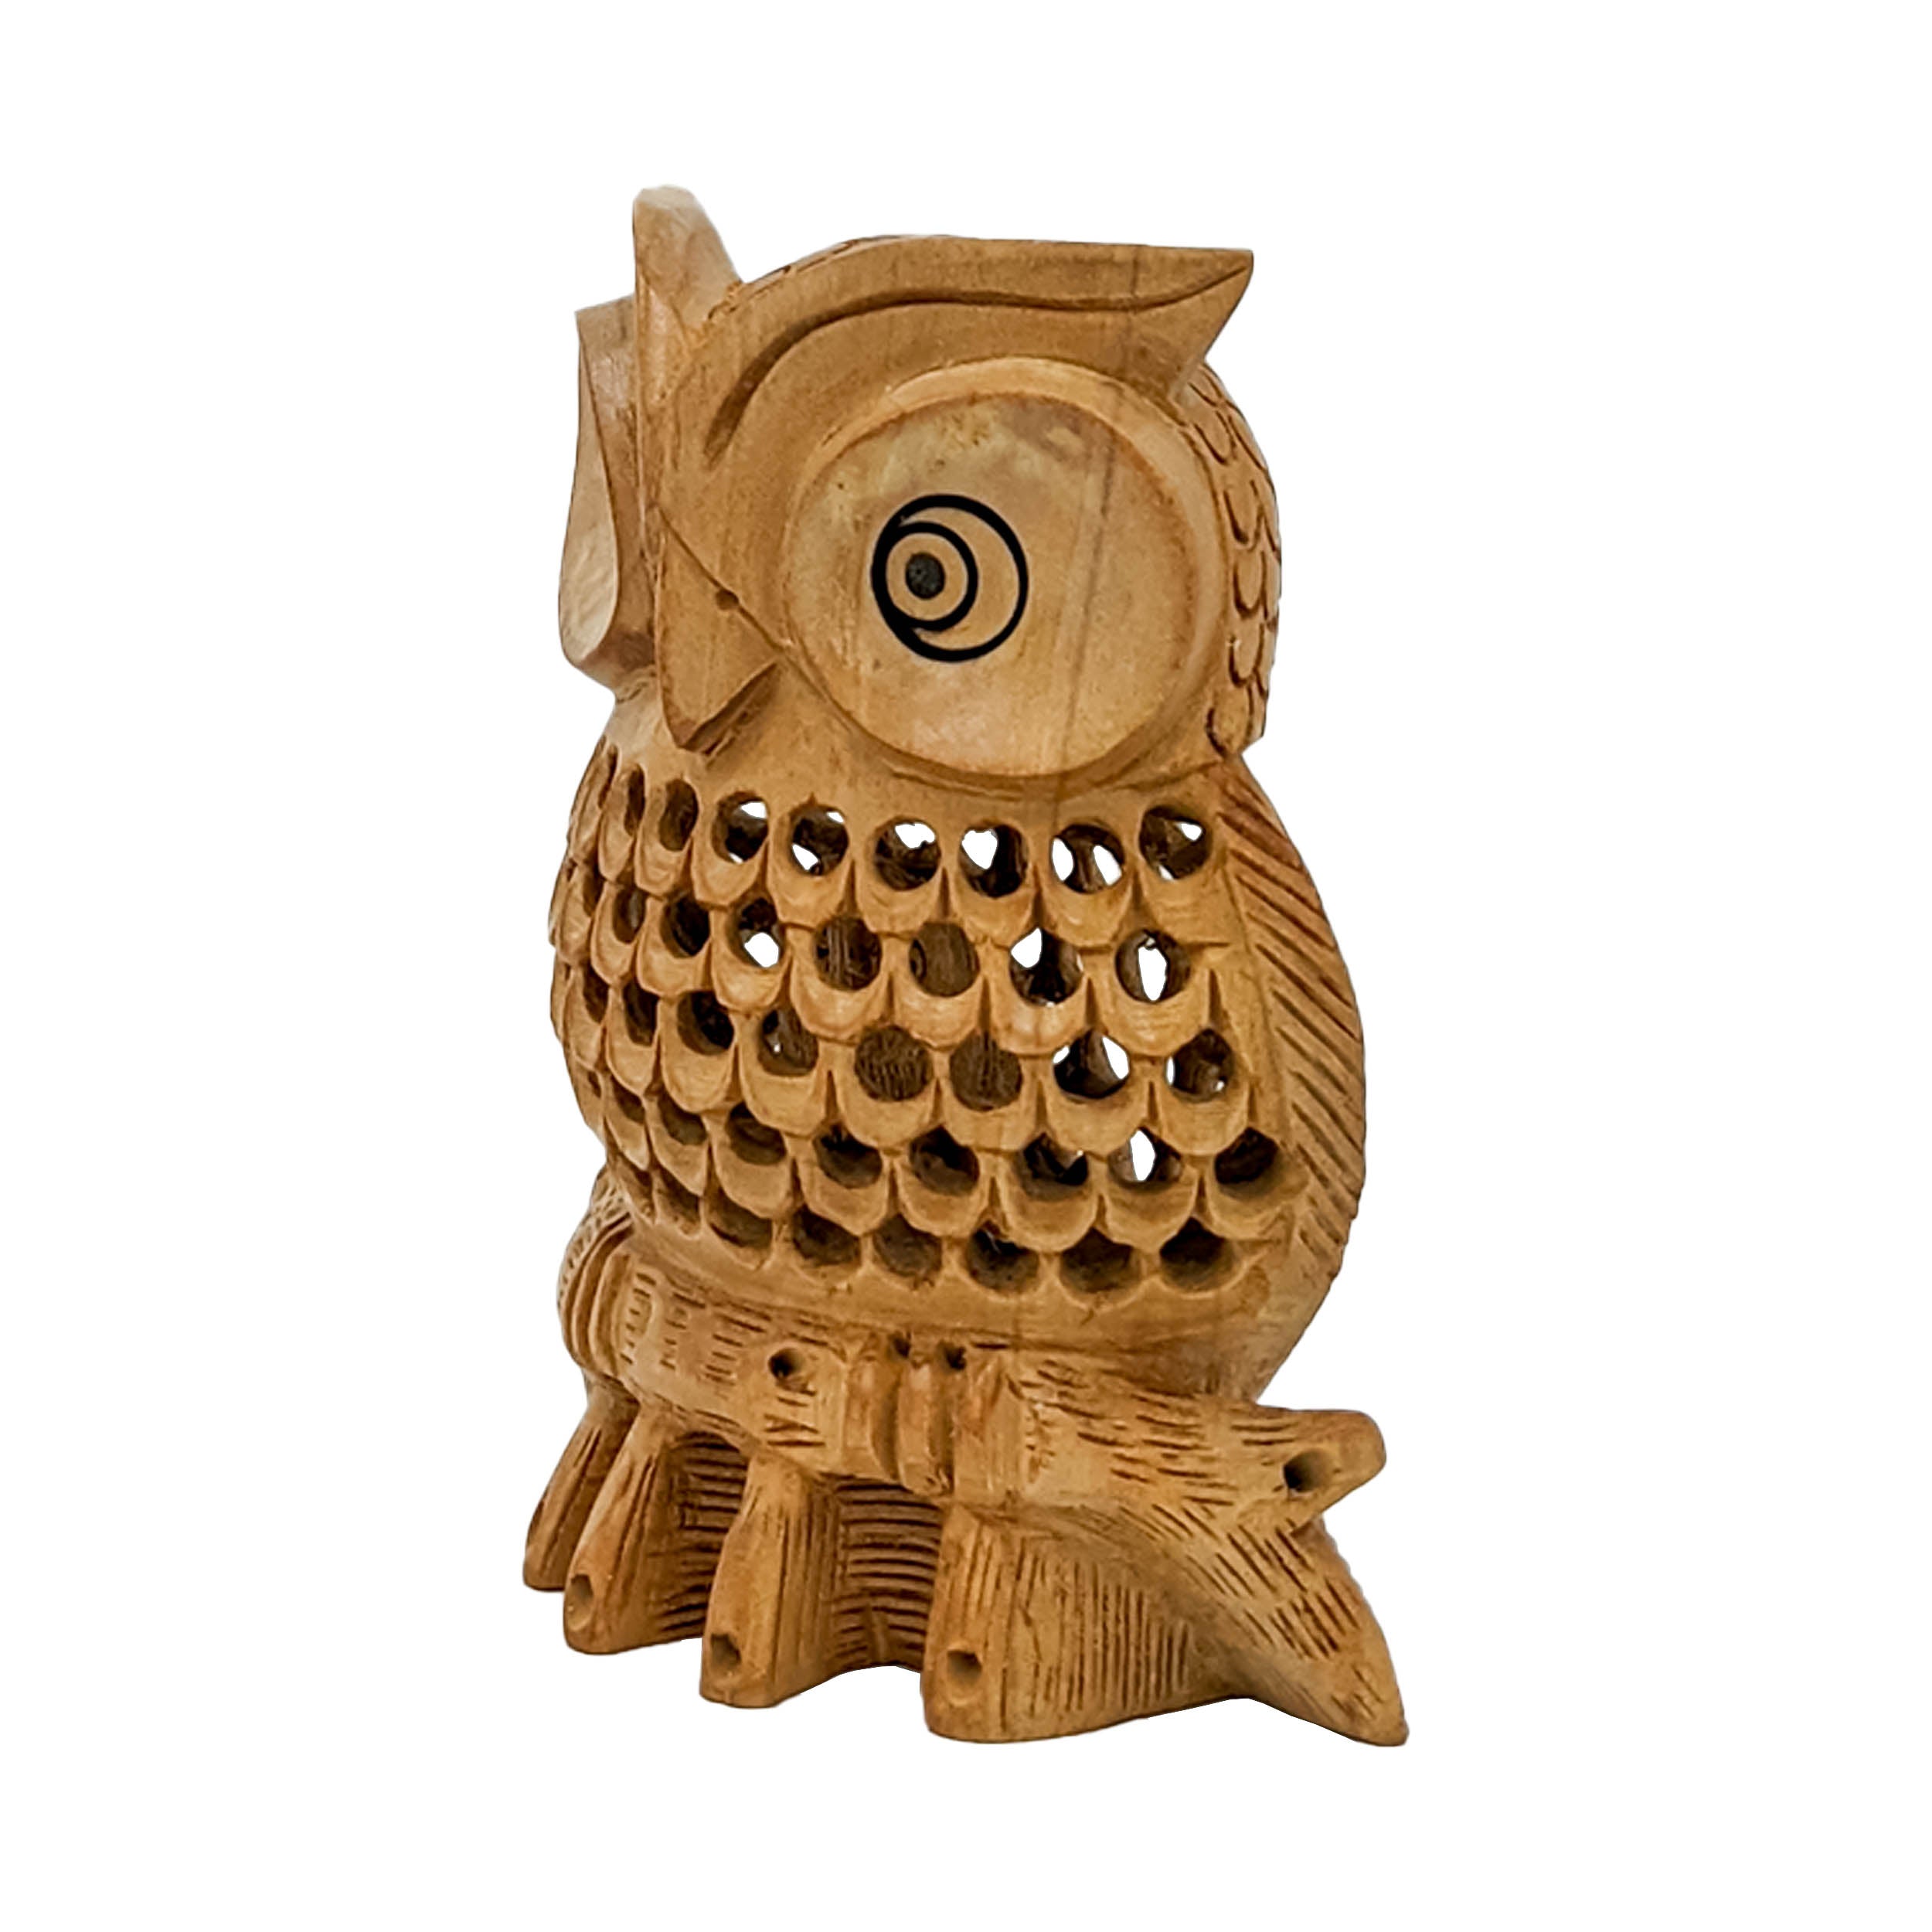 Handmade Wooden Owl Statue - Intricately Carved for Elegant Home Décor  (4inch)